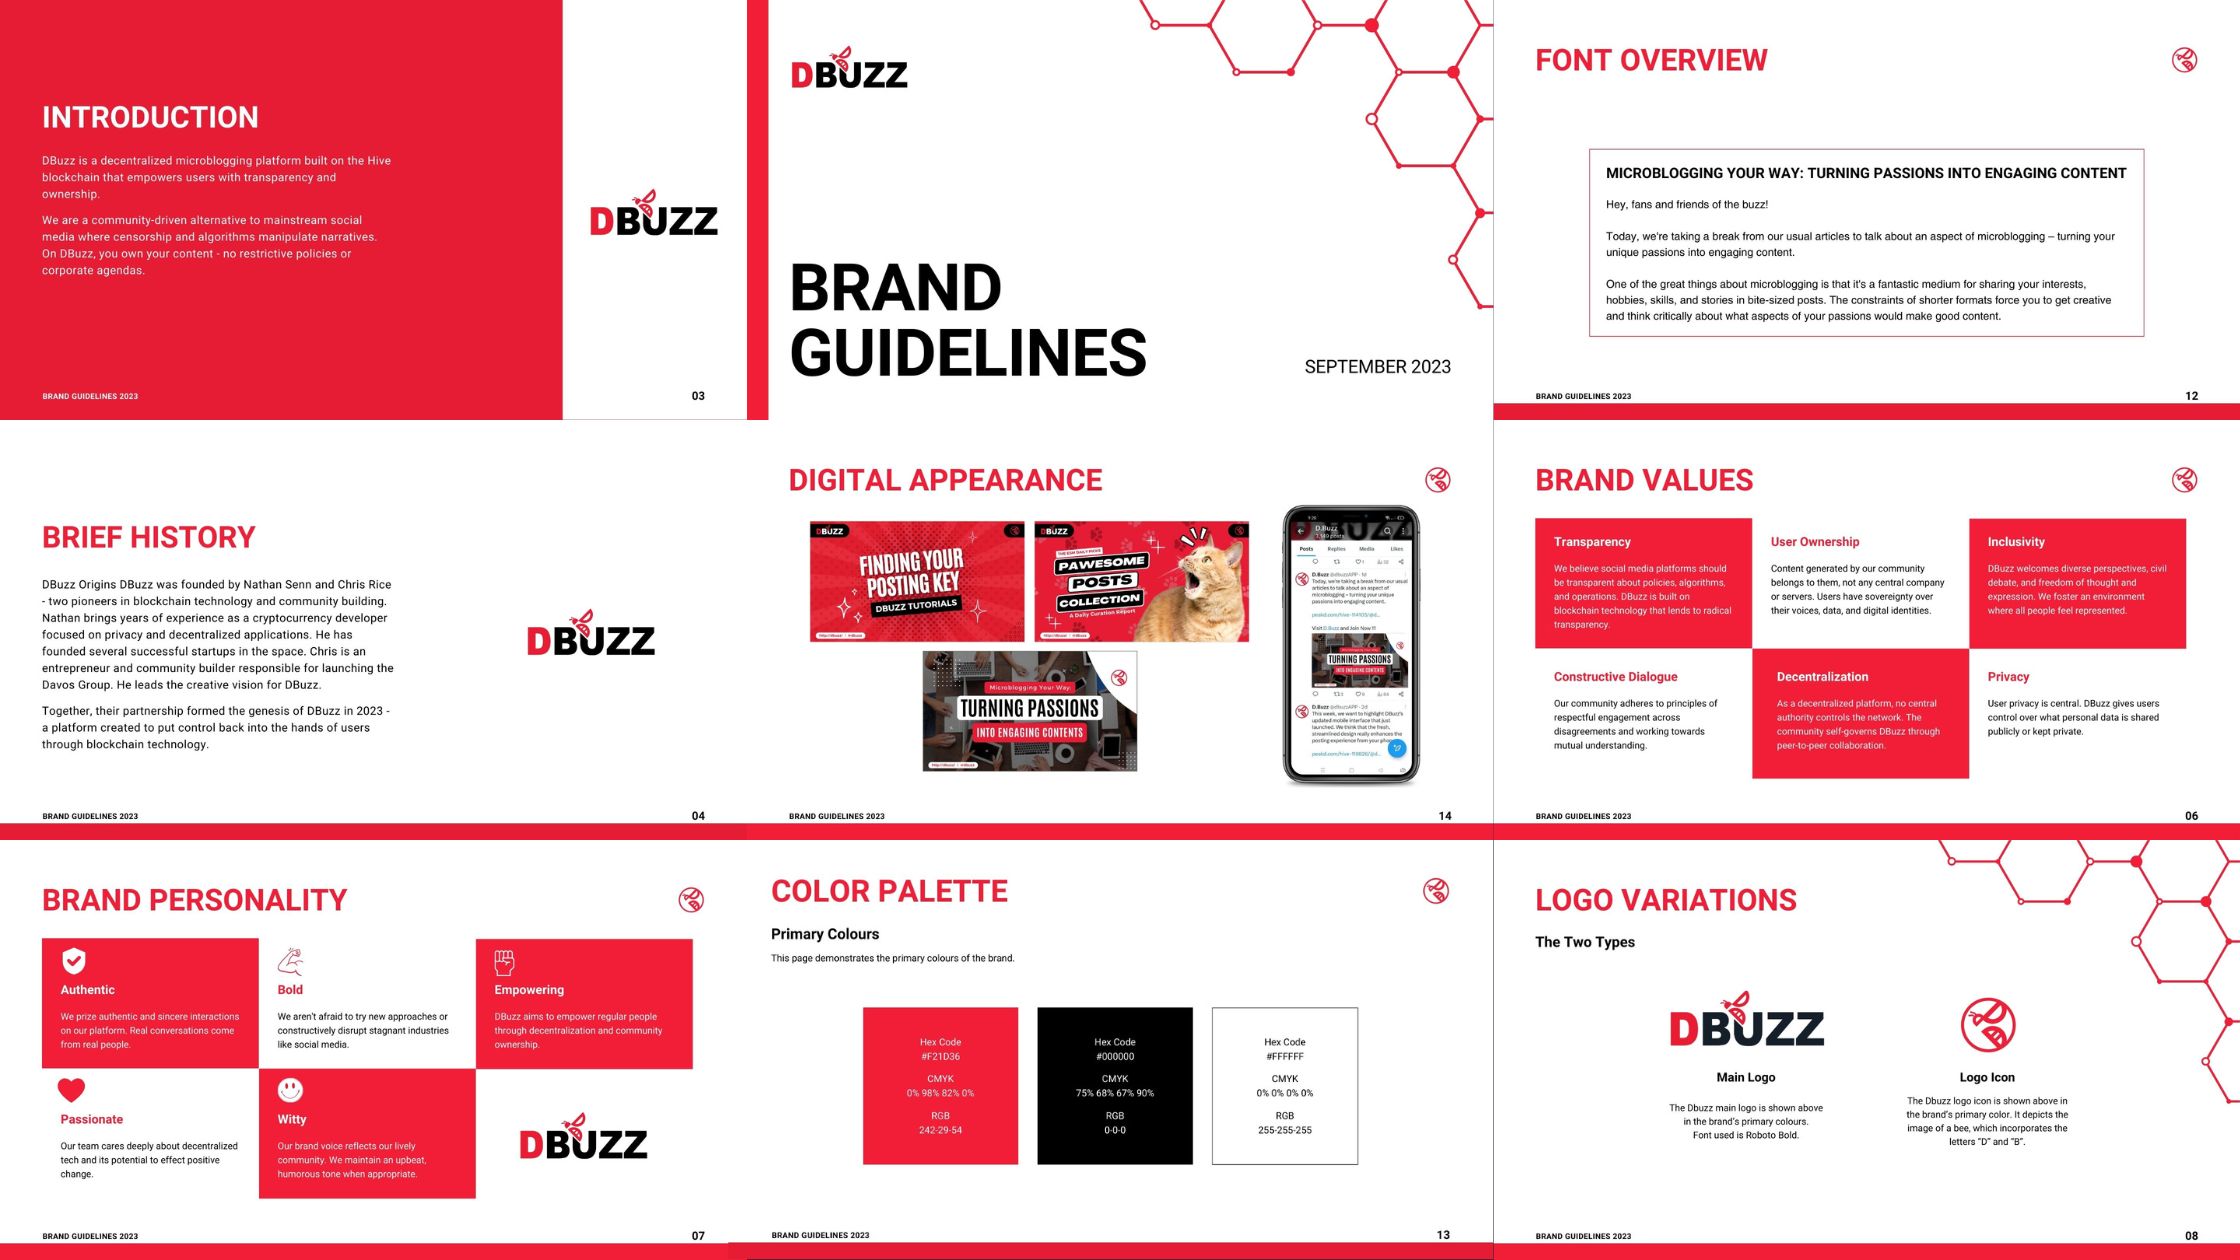 Spectra Ventures: Branding and Design for D.Buzz's Web 3.0 Growth